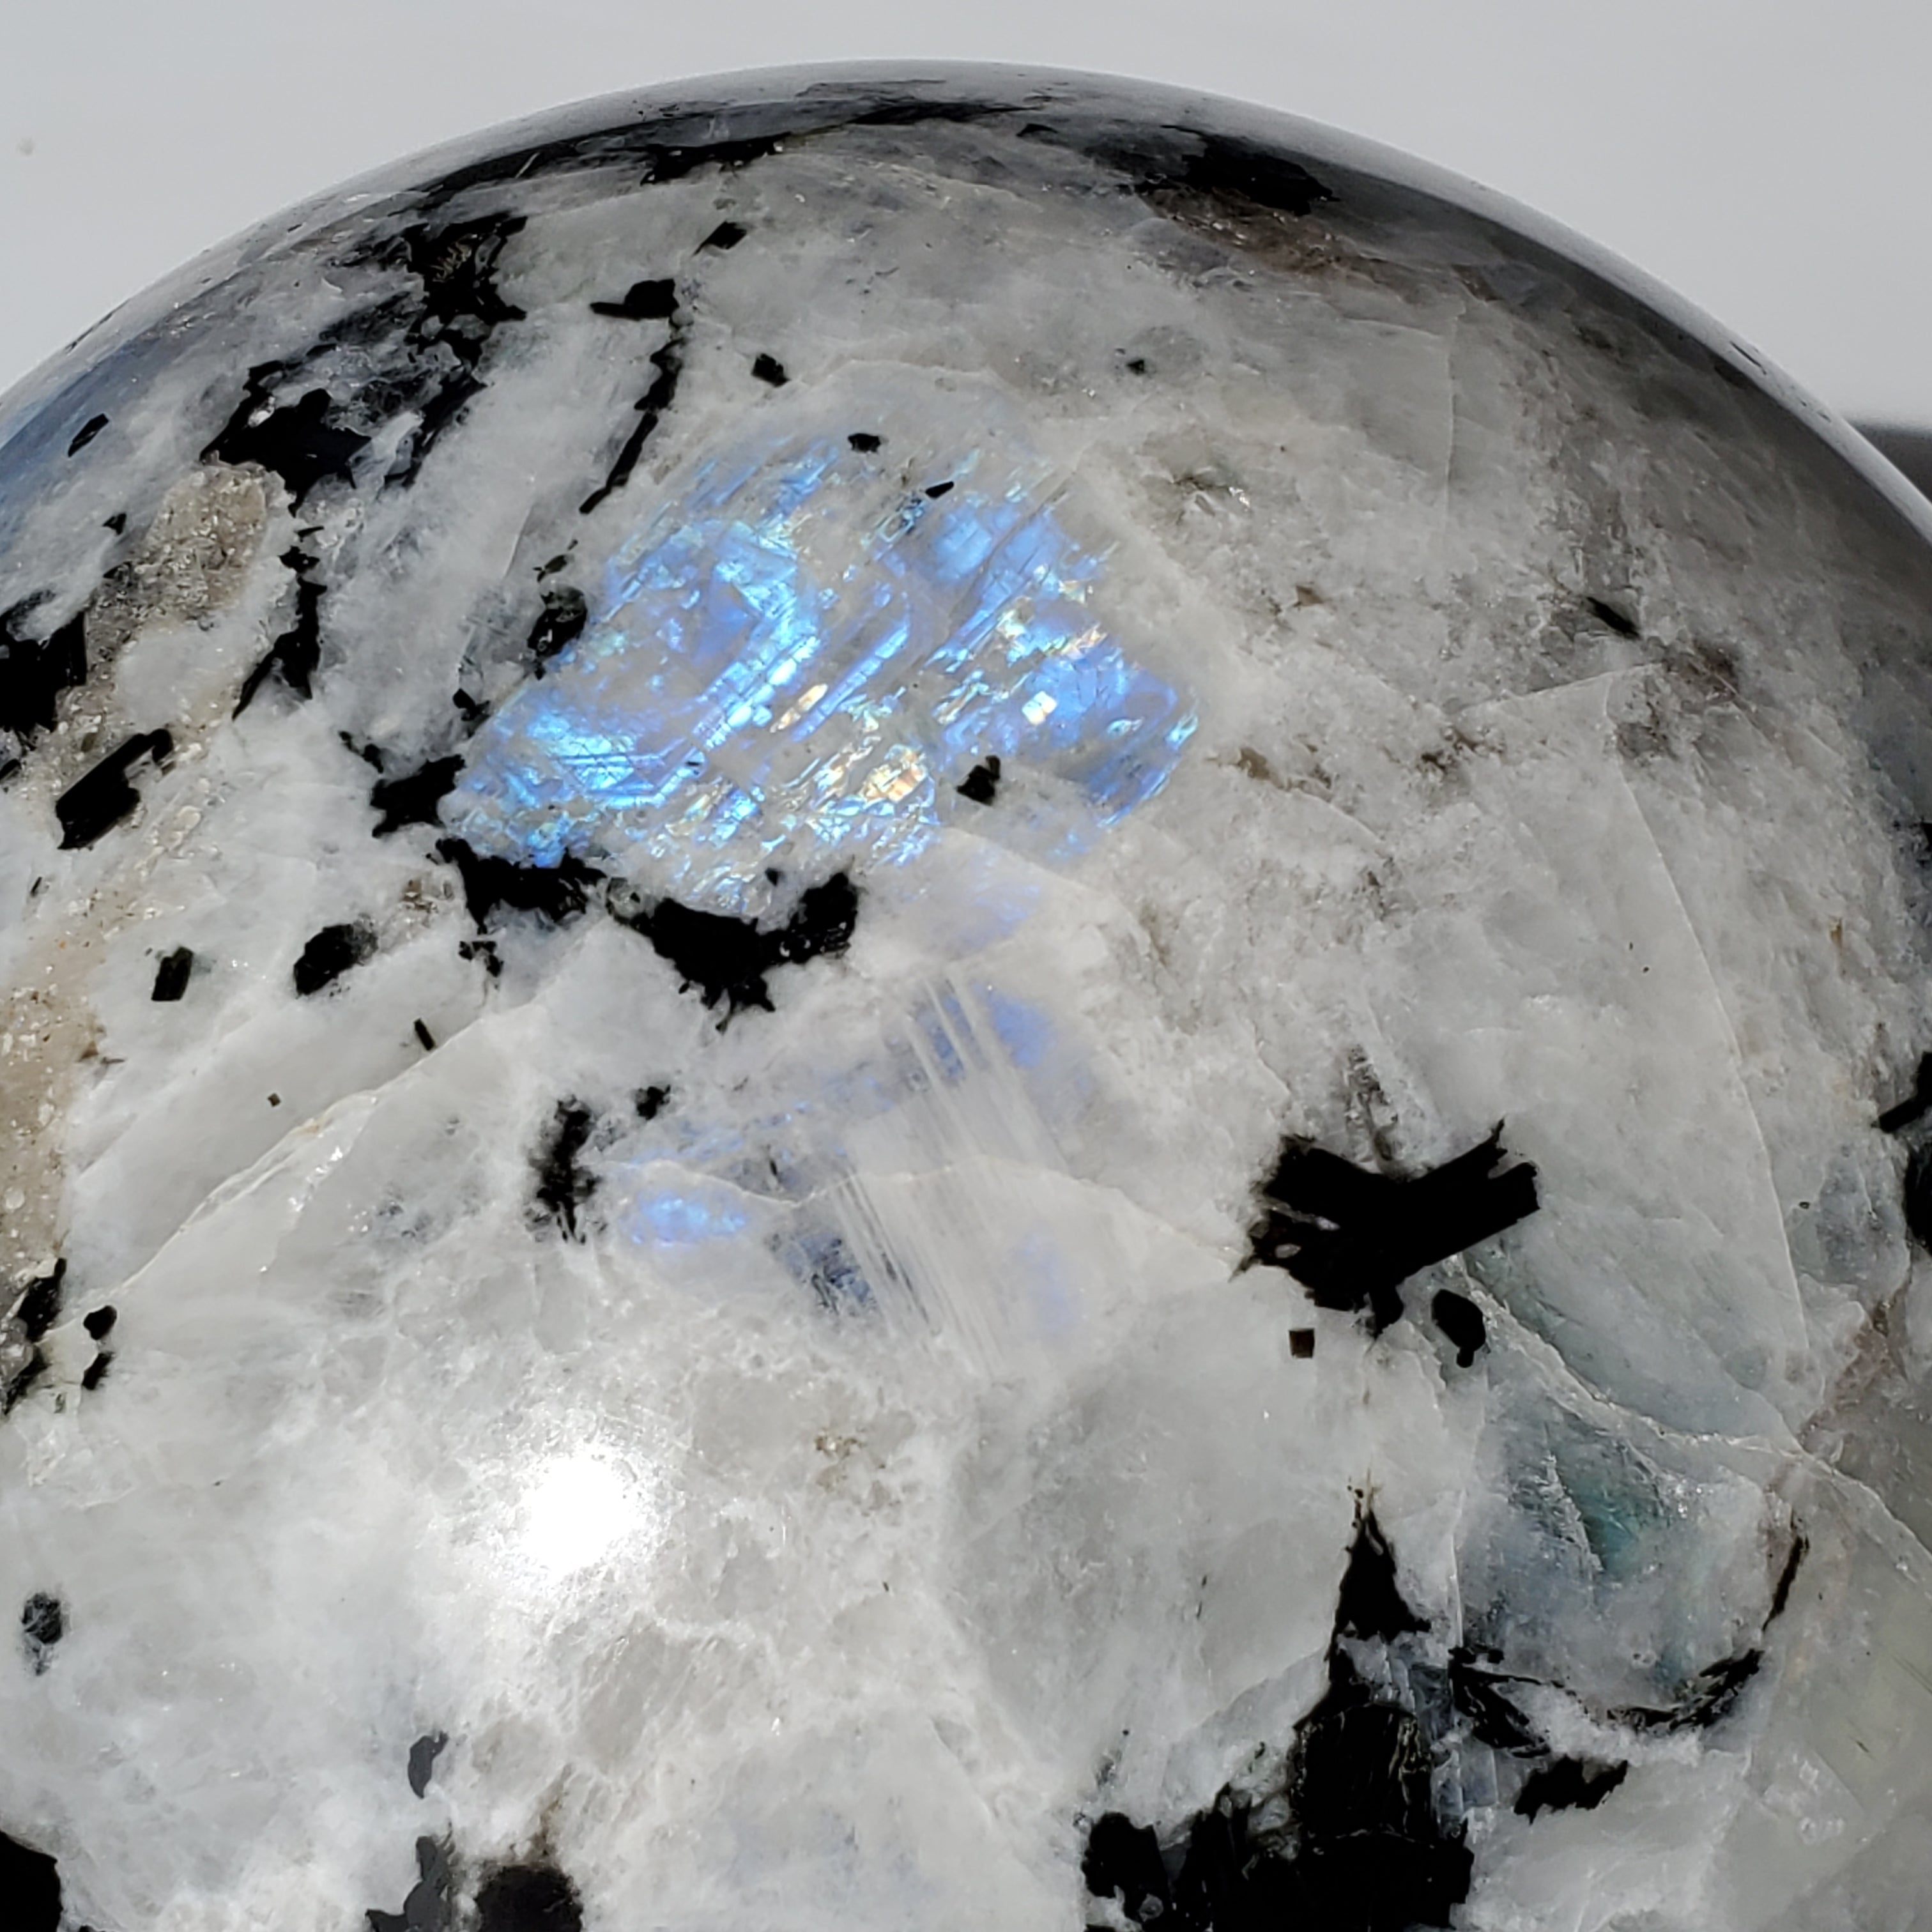 Moonstone Sphere Extra Large with rainbow inclusions